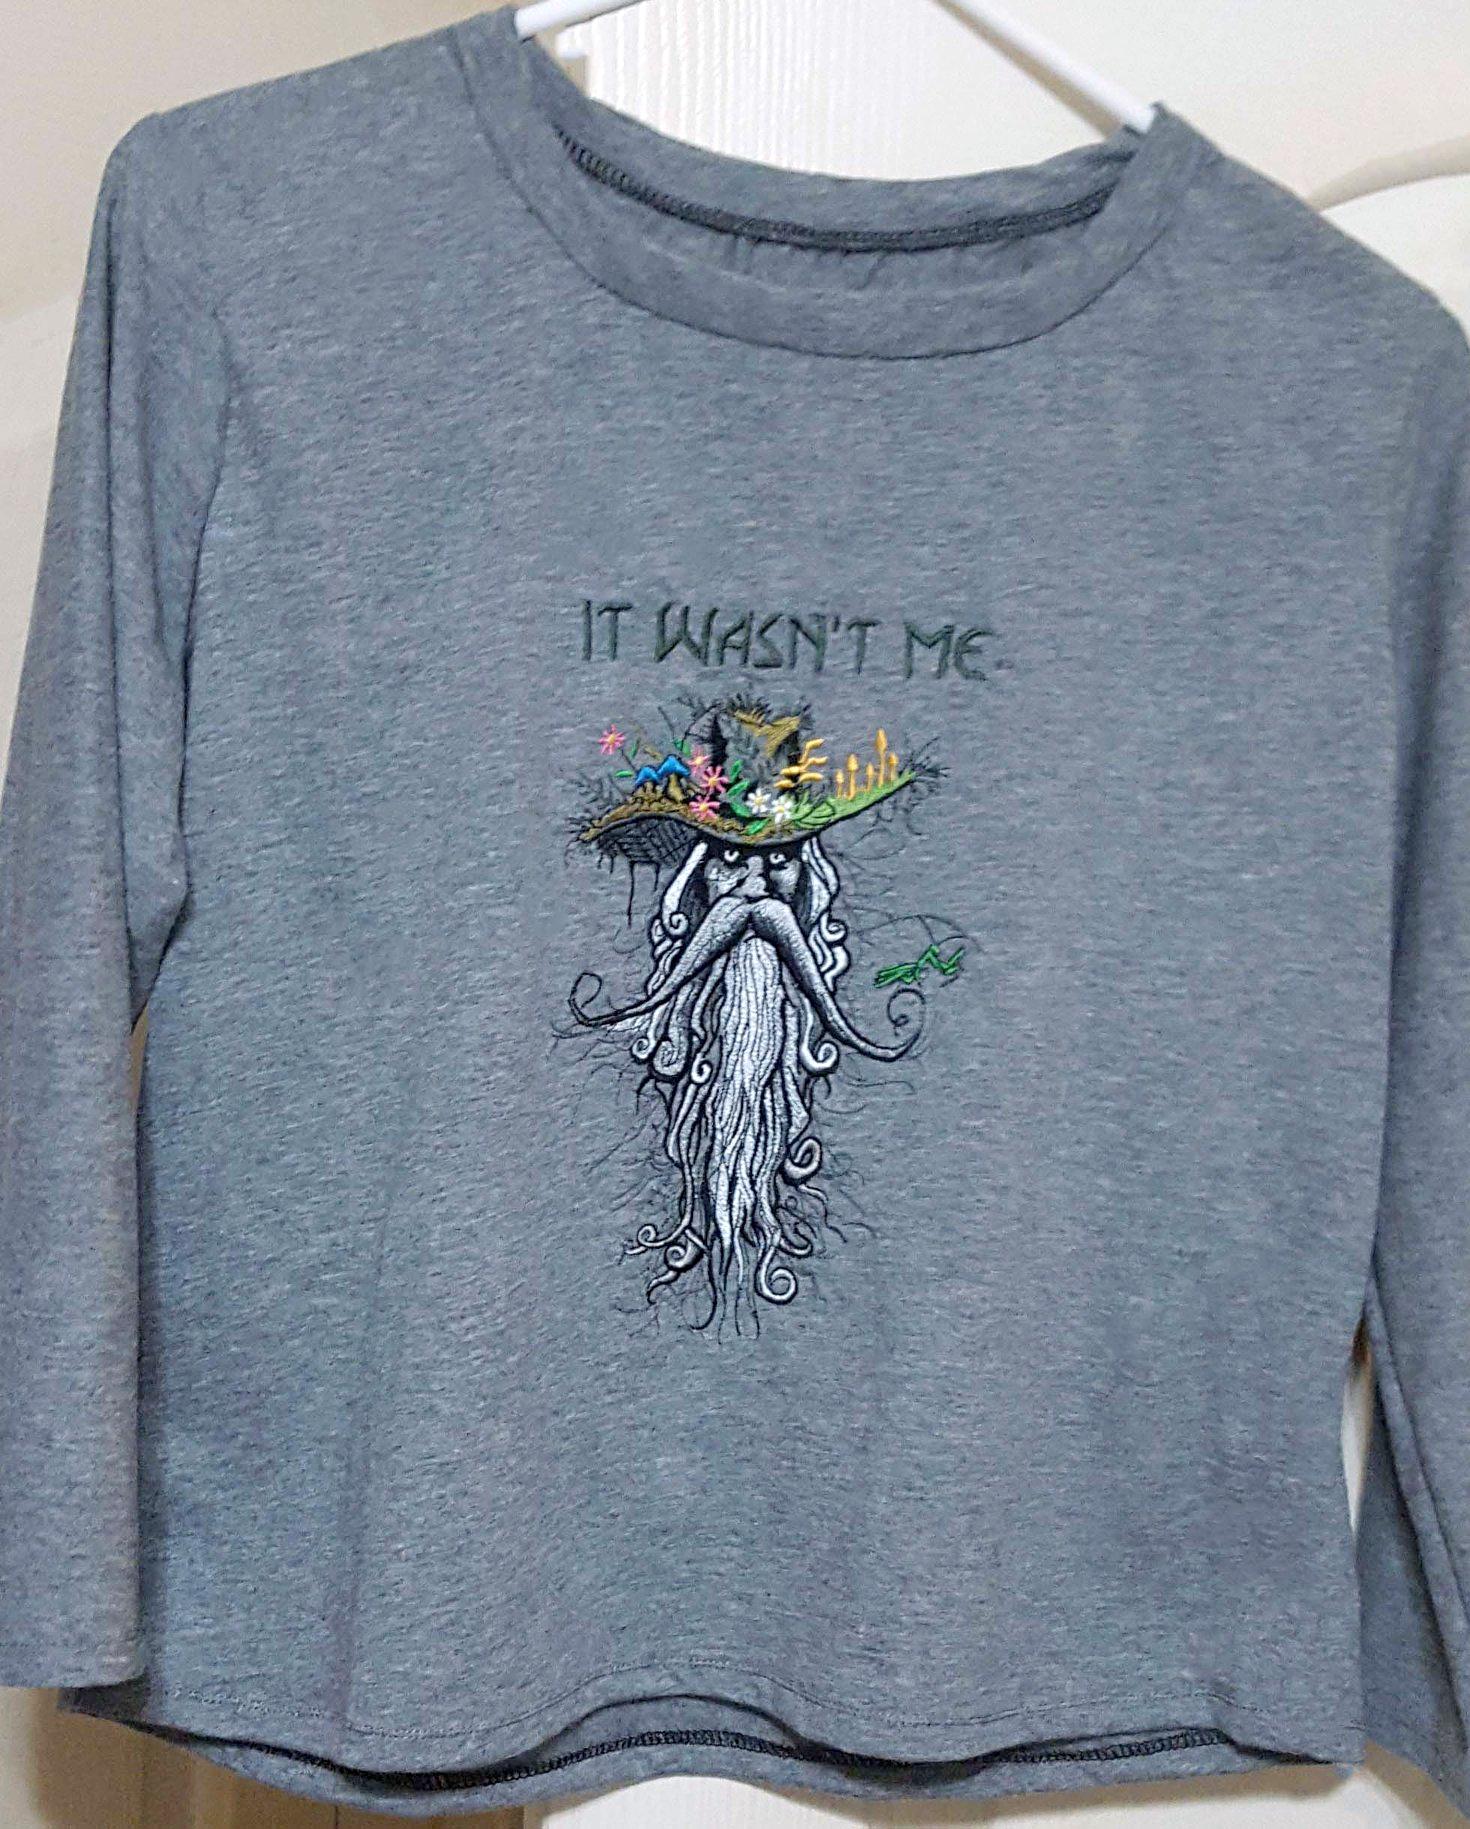 Embroidered sweater root man design